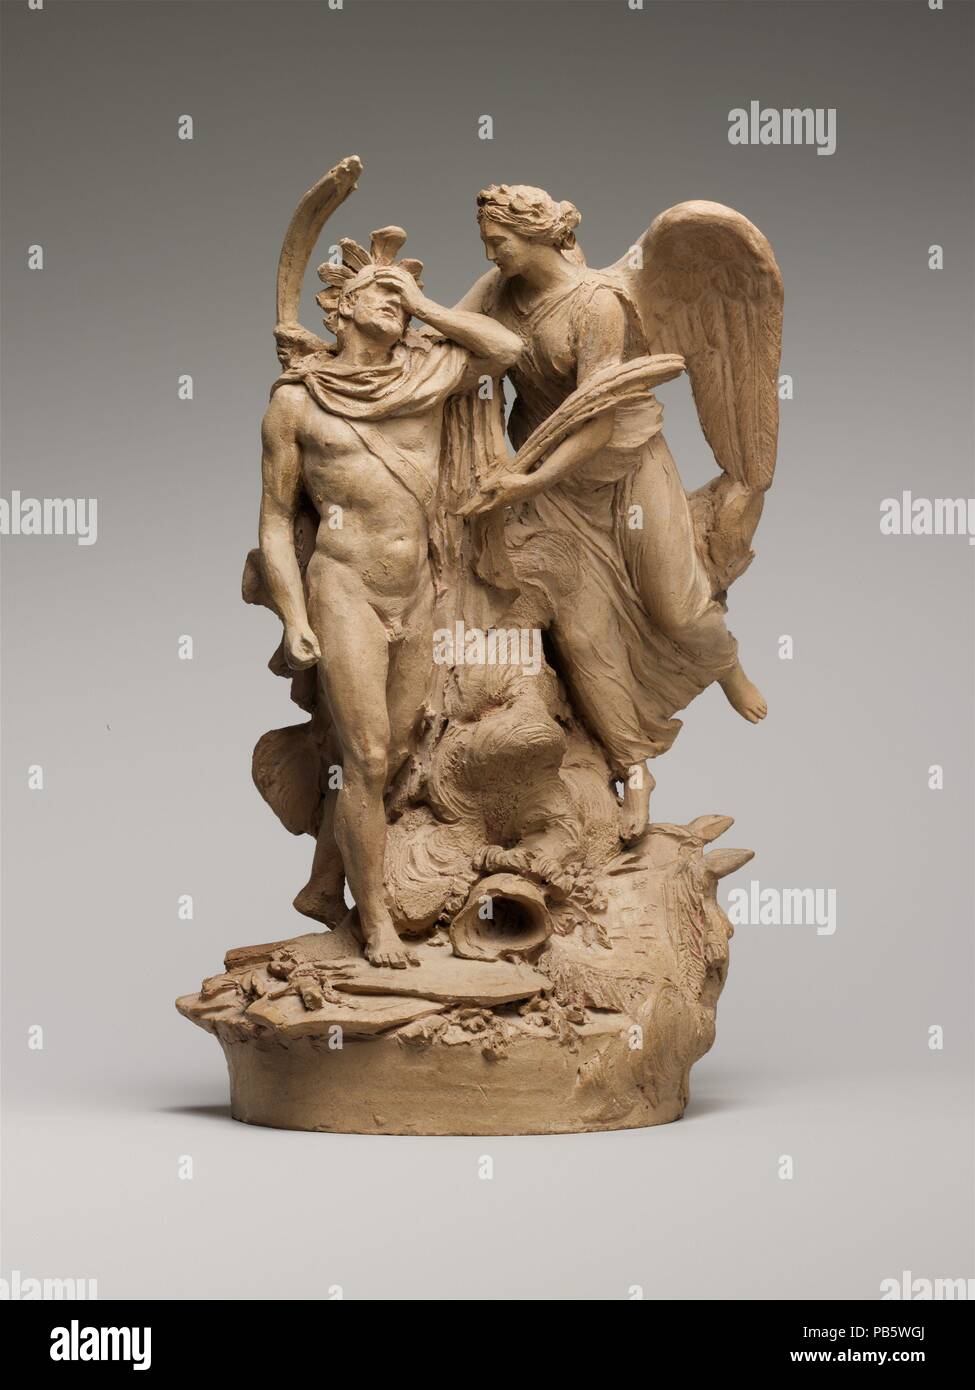 Allegorical Victory of the Grand Condé. Artist: Robert Guillaume Dardel (French, 1749-1821). Culture: French. Dimensions: 9 × 6 × 4 in. (22.9 × 15.2 × 10.2 cm). Date: 1786.  The year 1786 was the centenary of the death of Louis II de Bourbon, prince de Condé, the illustrious warrior of the Louis XIV period known to all as the Grand Condé. His descendant, the eighth prince de Condé, commissioned decorations to honor his forebear. The eighth prince allotted this subject - winged Victory awarding the palm to a wounded hero in agony - to his favorite sculptor, the talented Robert-Guillaume Dardel. Stock Photo